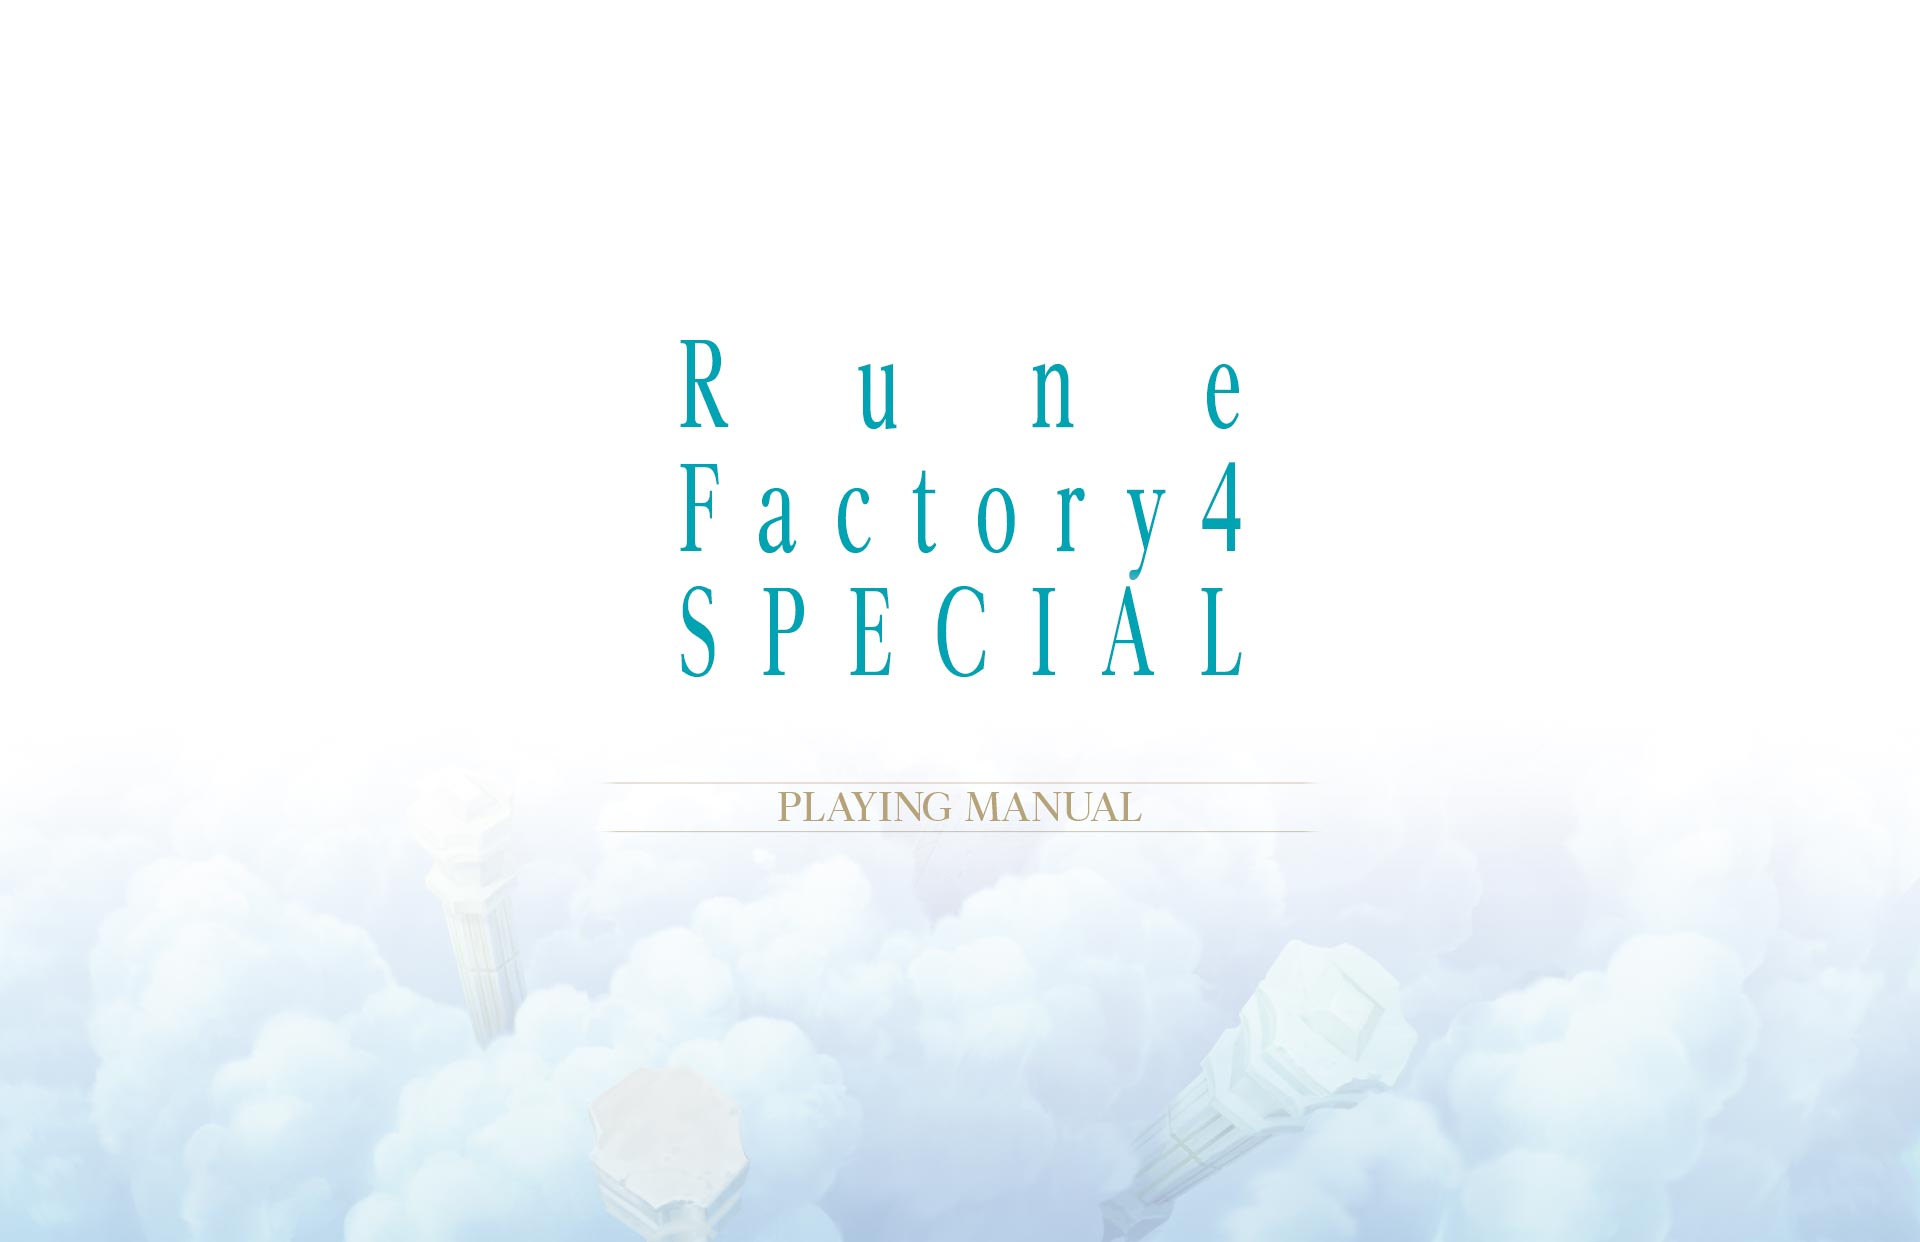 Rune Factory 4 SPECIAL PLAYING MANUAL